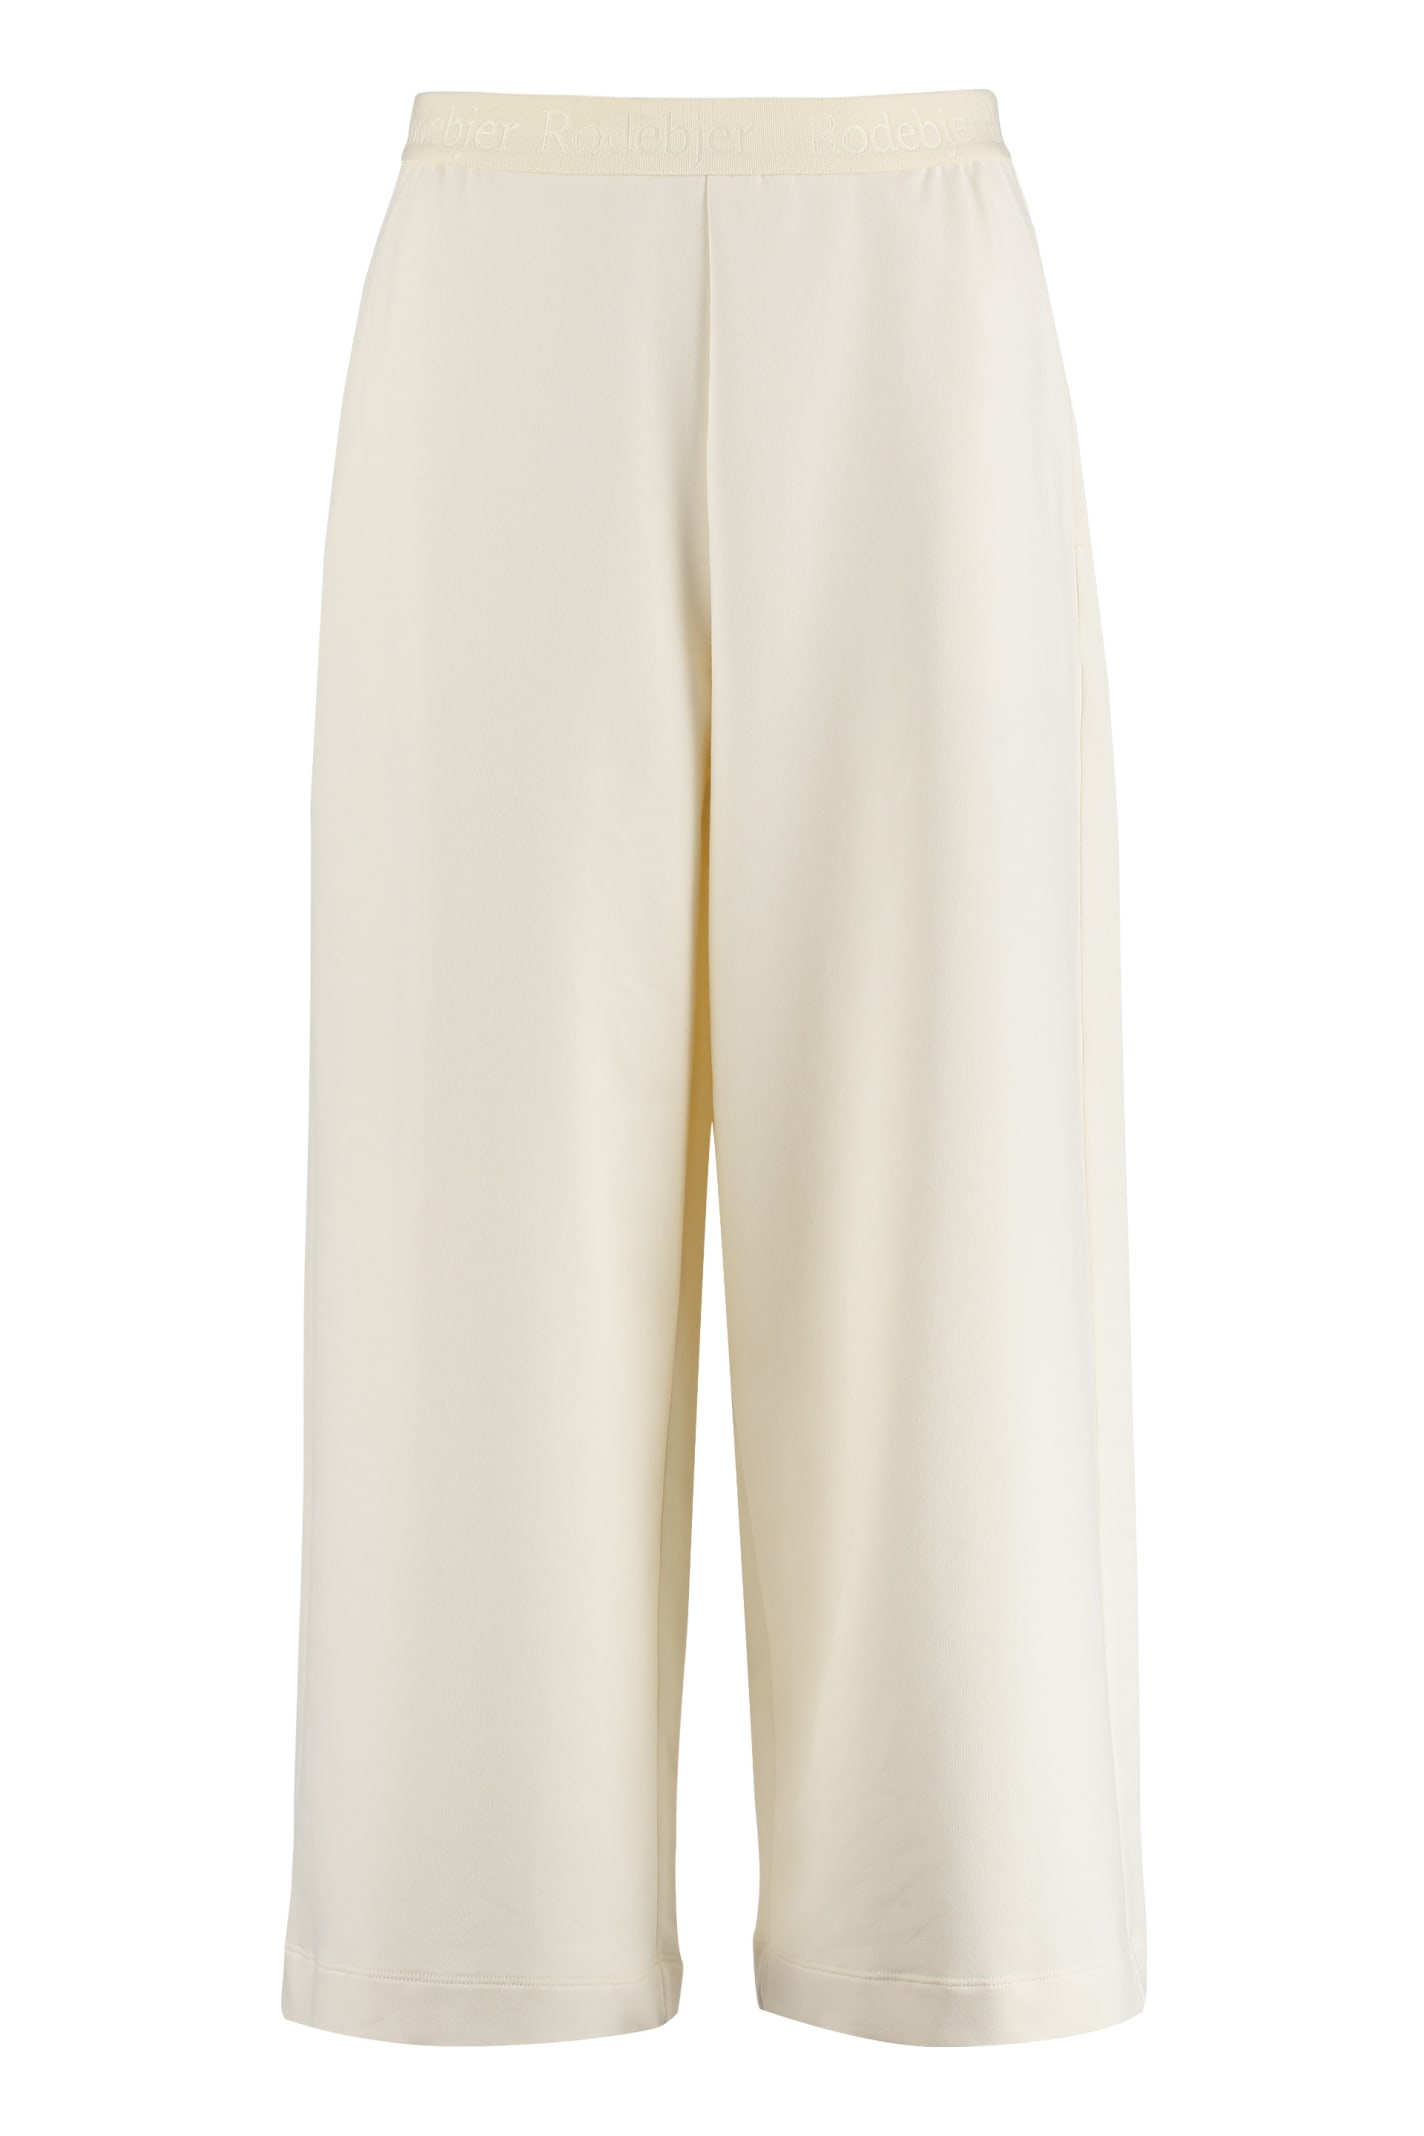 Rodebjer Roma Wide Leg Trousers In Panna